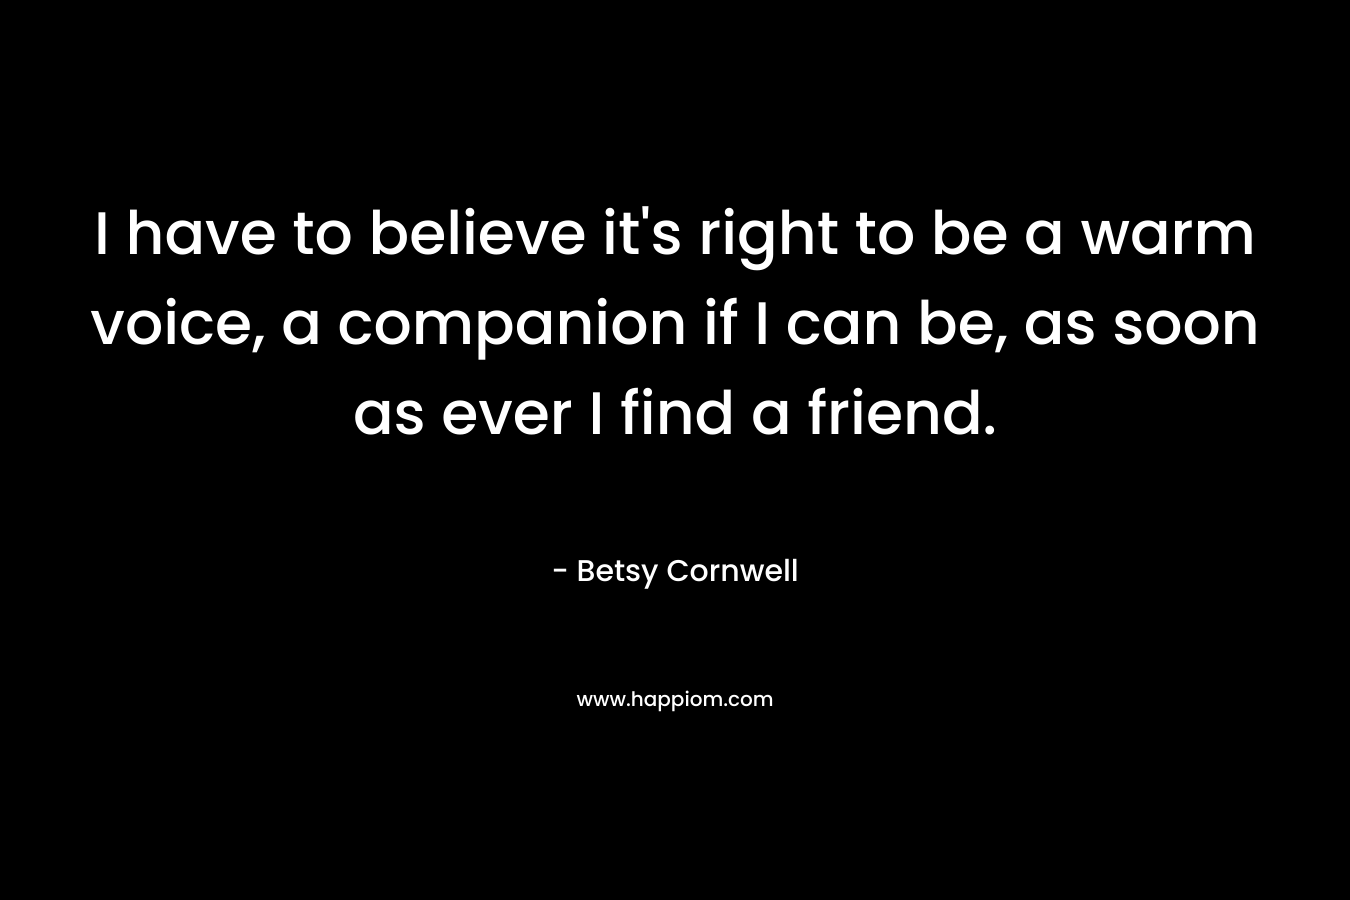 I have to believe it's right to be a warm voice, a companion if I can be, as soon as ever I find a friend.